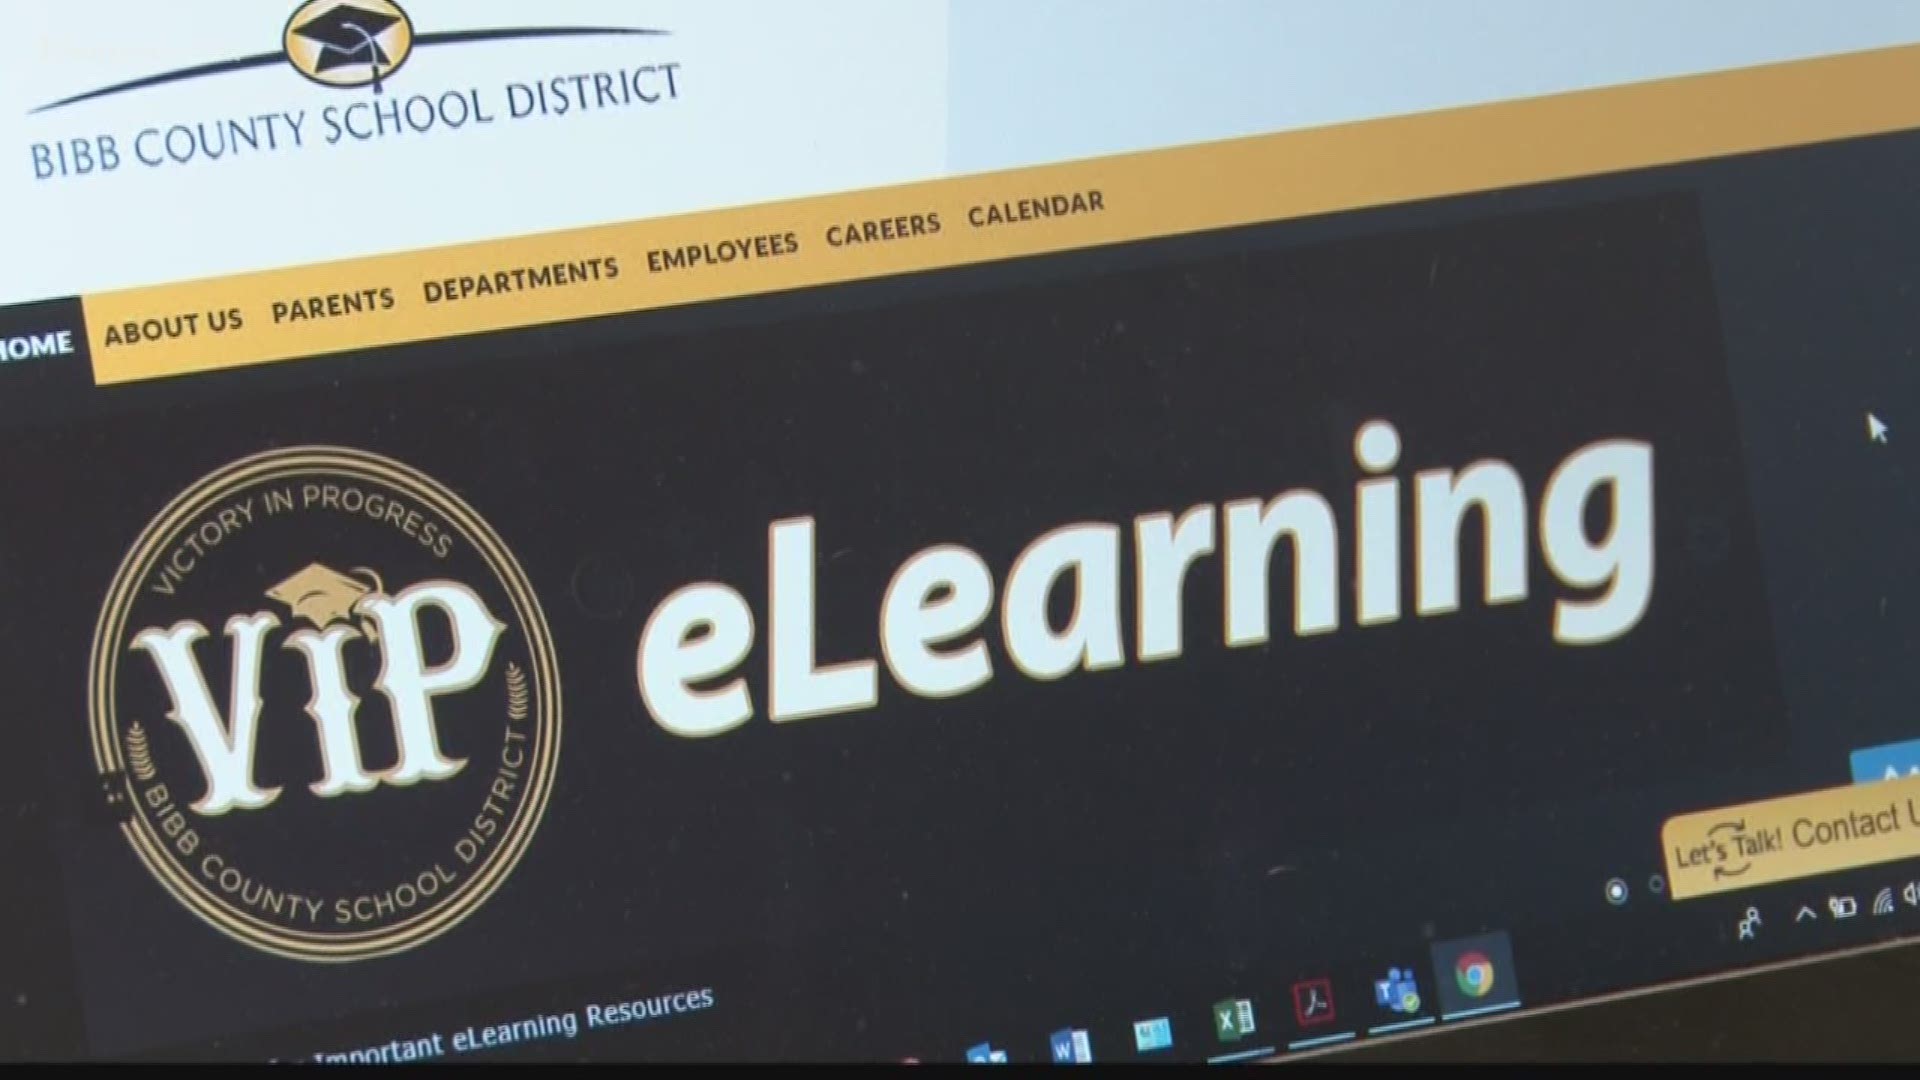 Gov. Brian Kemp closed all public schools until the end of March due to coronavirus. Here's how Bibb County's students are tackling distance learning.